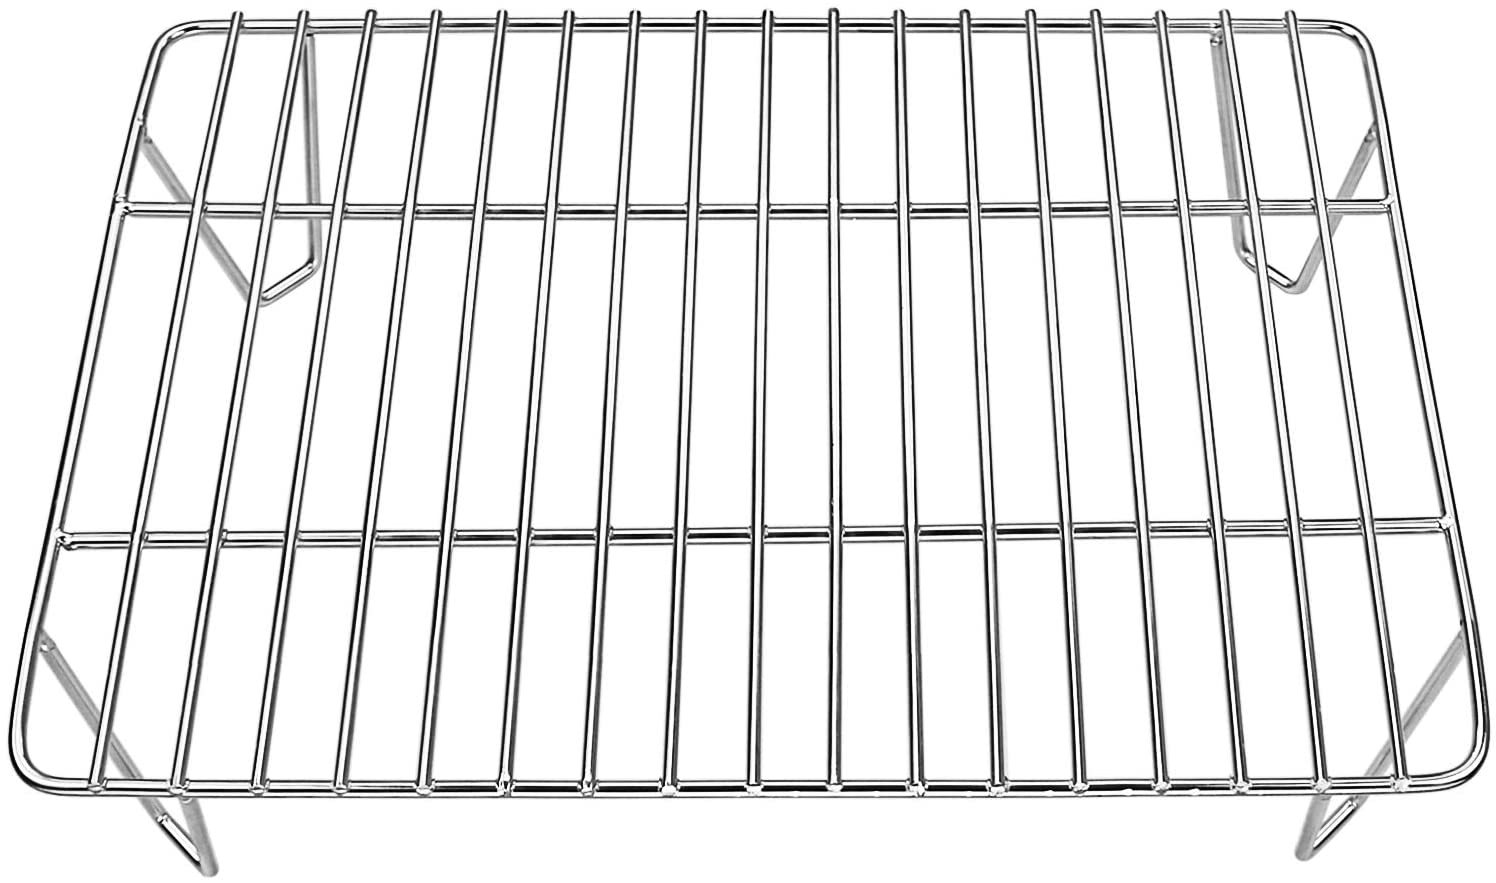 Grisun Grill Rack for Green Mountain Grill Davy Crockett Pellet Grill, Upper Rack Replacement for Gmg-6016, Warming Rack Addition for Doubled